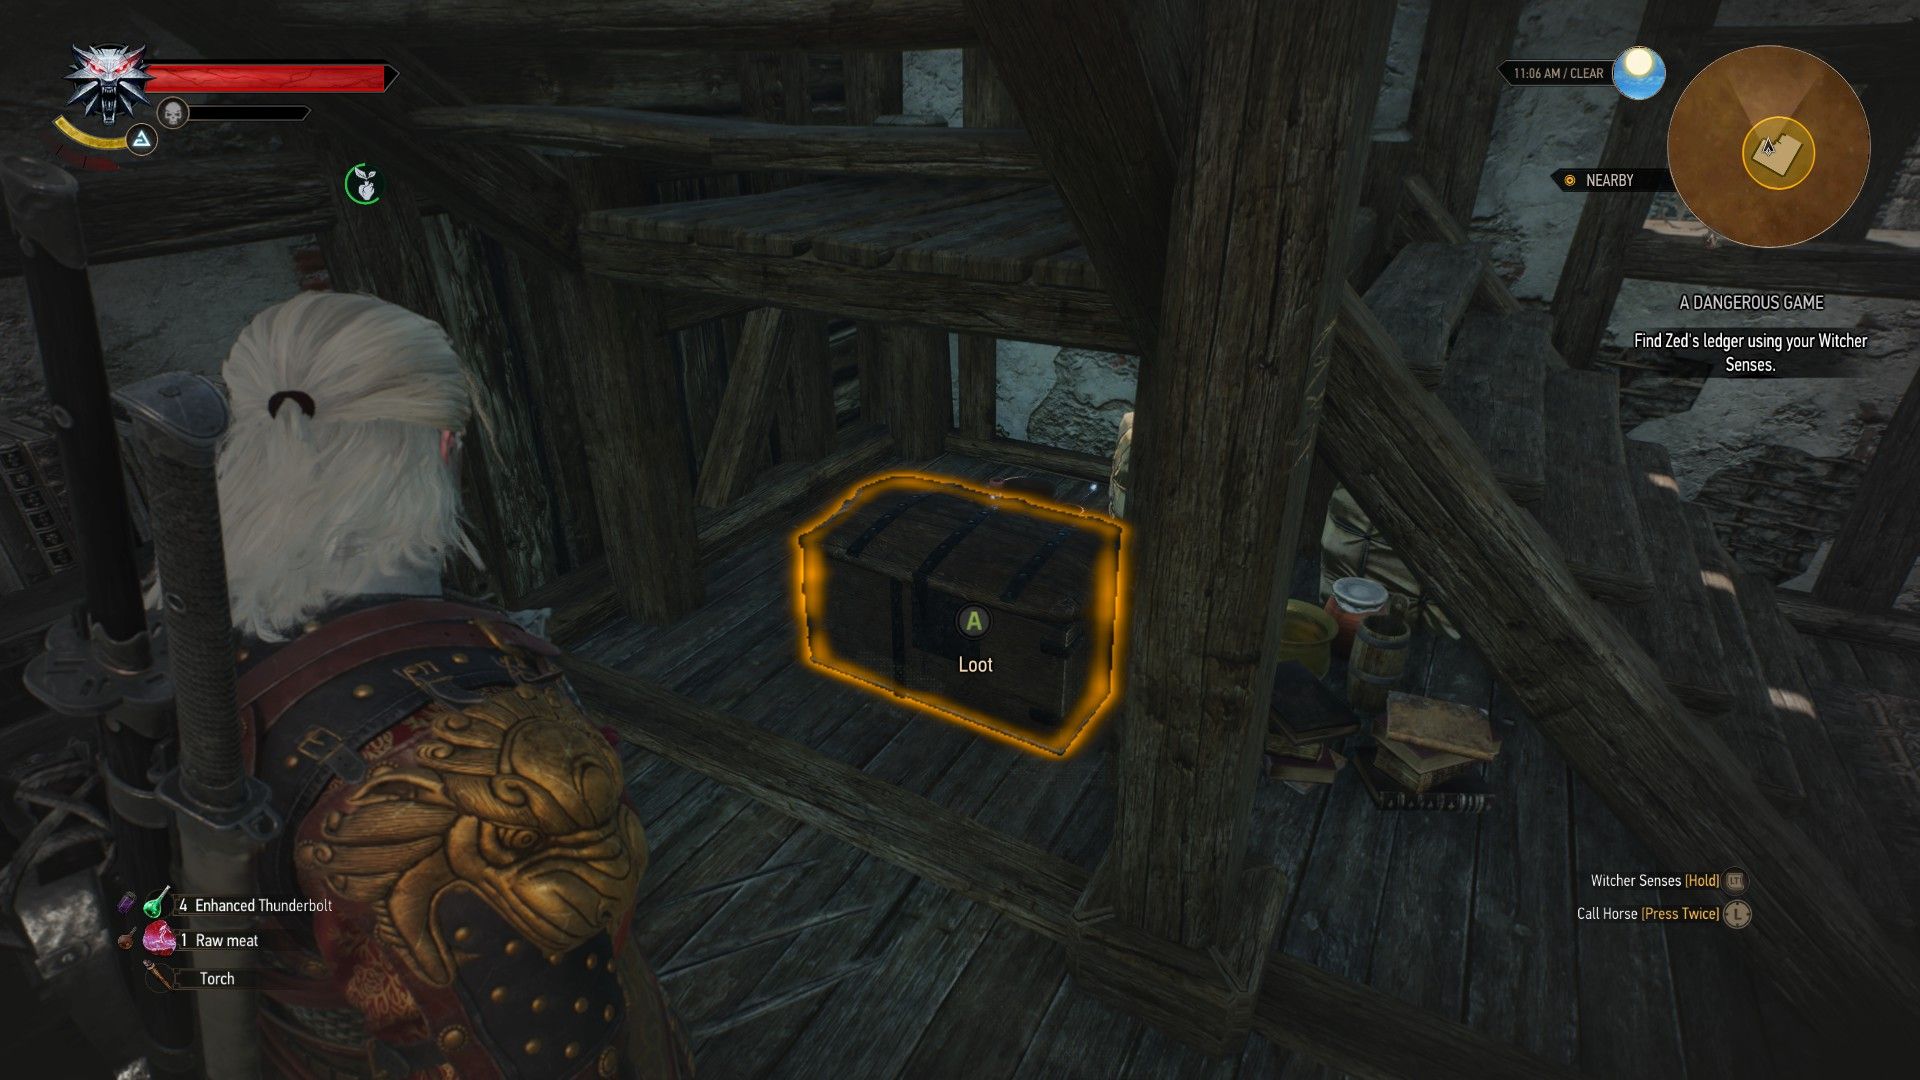 A screenshot of Geralt looking at a chest containing quest-essential items under a staircase in Zed's house in Novigrad.